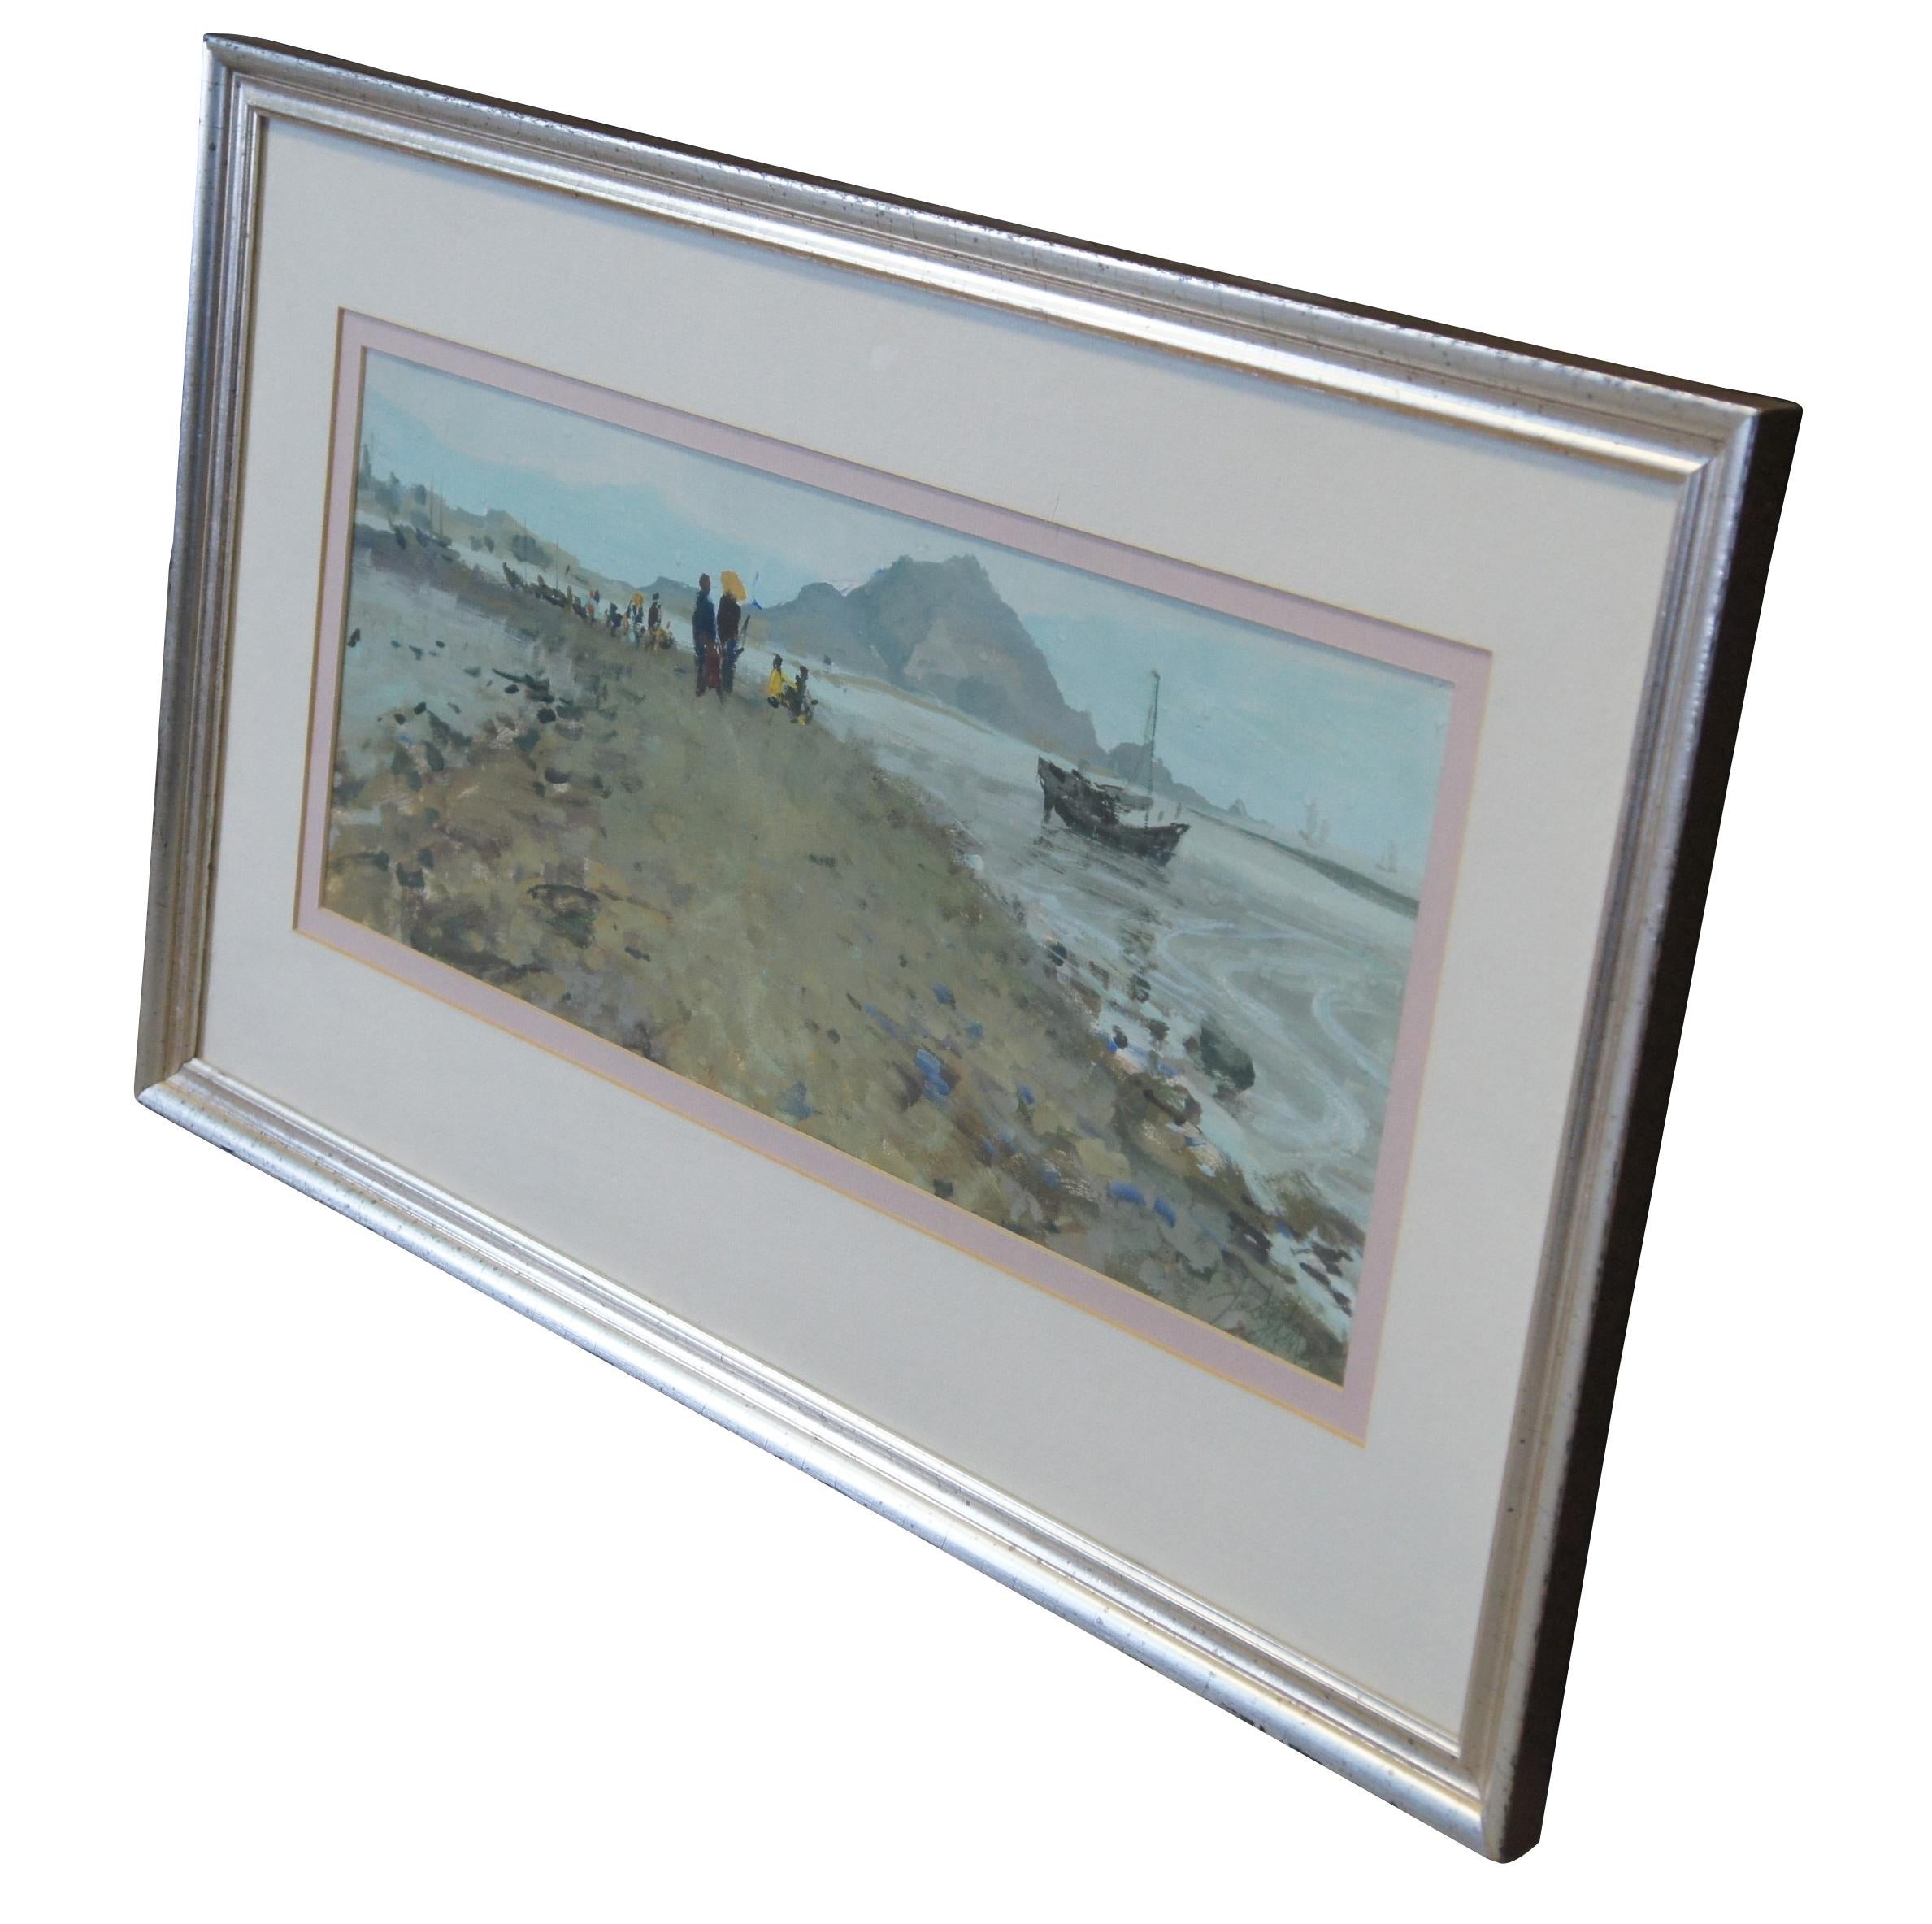 Vintage Asian Impressionist watercolor seascape painting. Features figures along a peninsula with sailboats. The painting is signed lower right in pencil by Sue. The rest of the signature cannot be made out

 Measures: 27